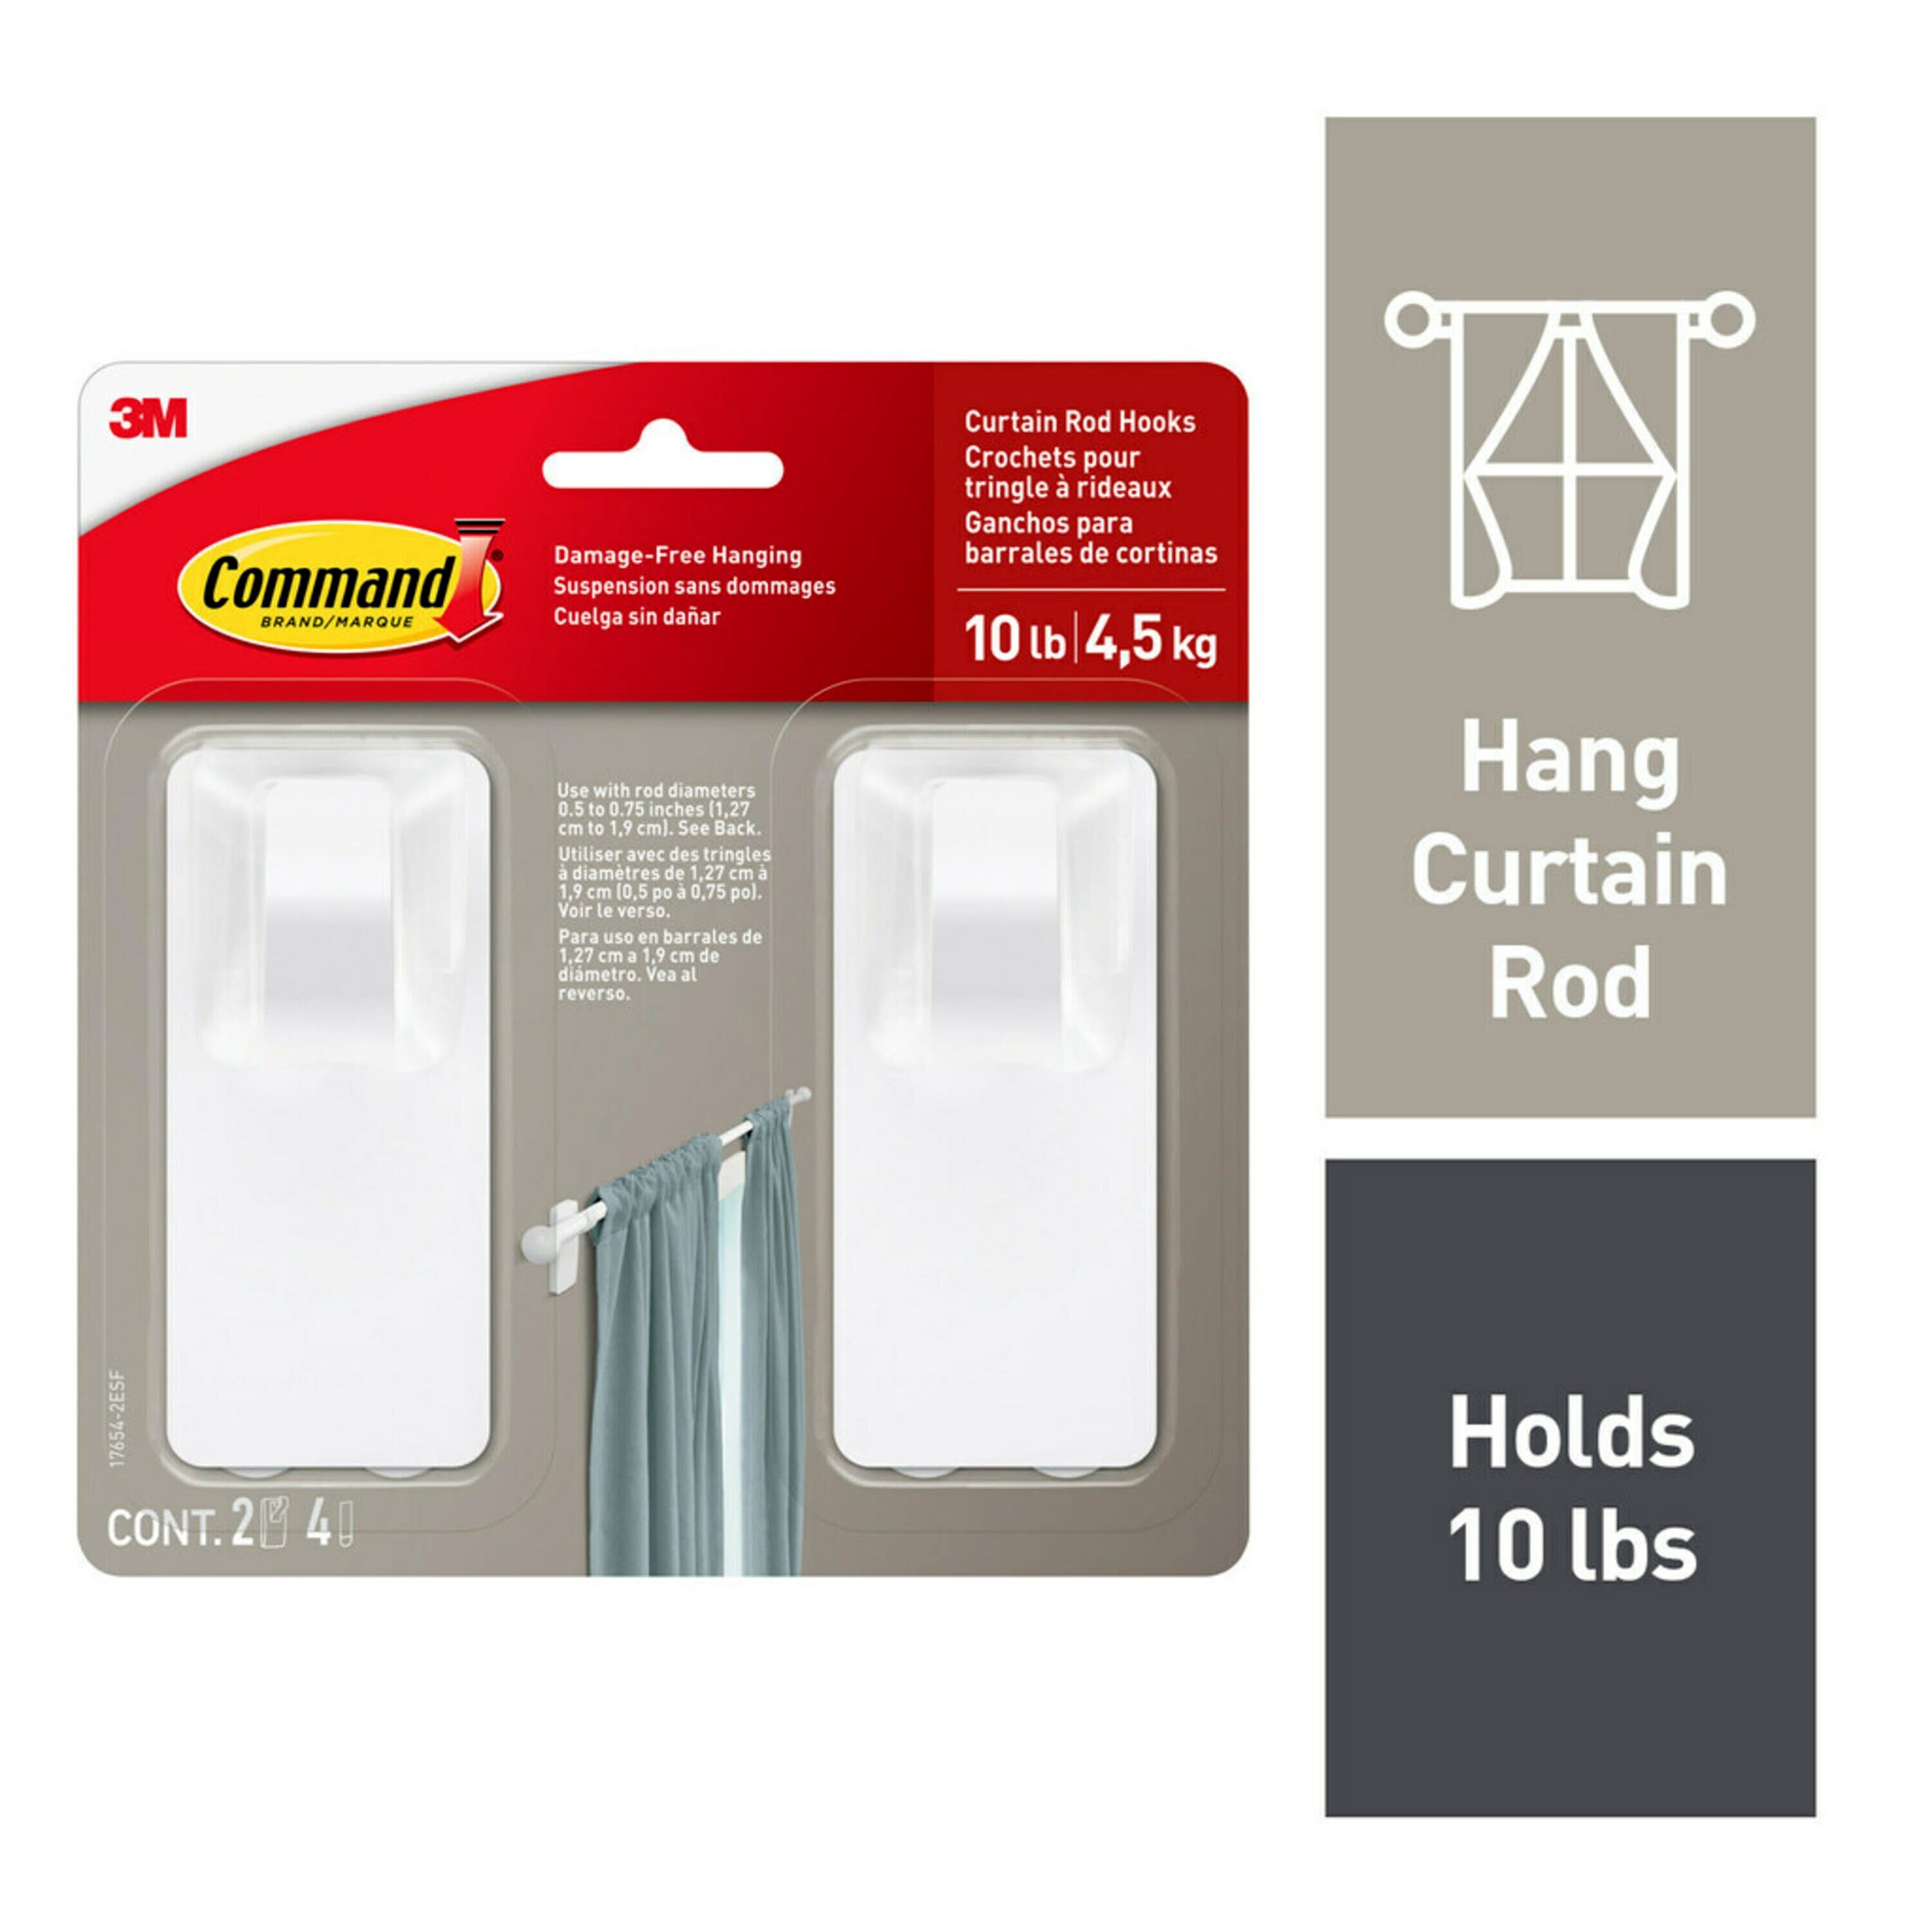  Command Satin Nickel Curtain Rod Hooks with Command Strips,  Hang Curtain Rods No Drilling, Holds up to 10 lbs : Home & Kitchen